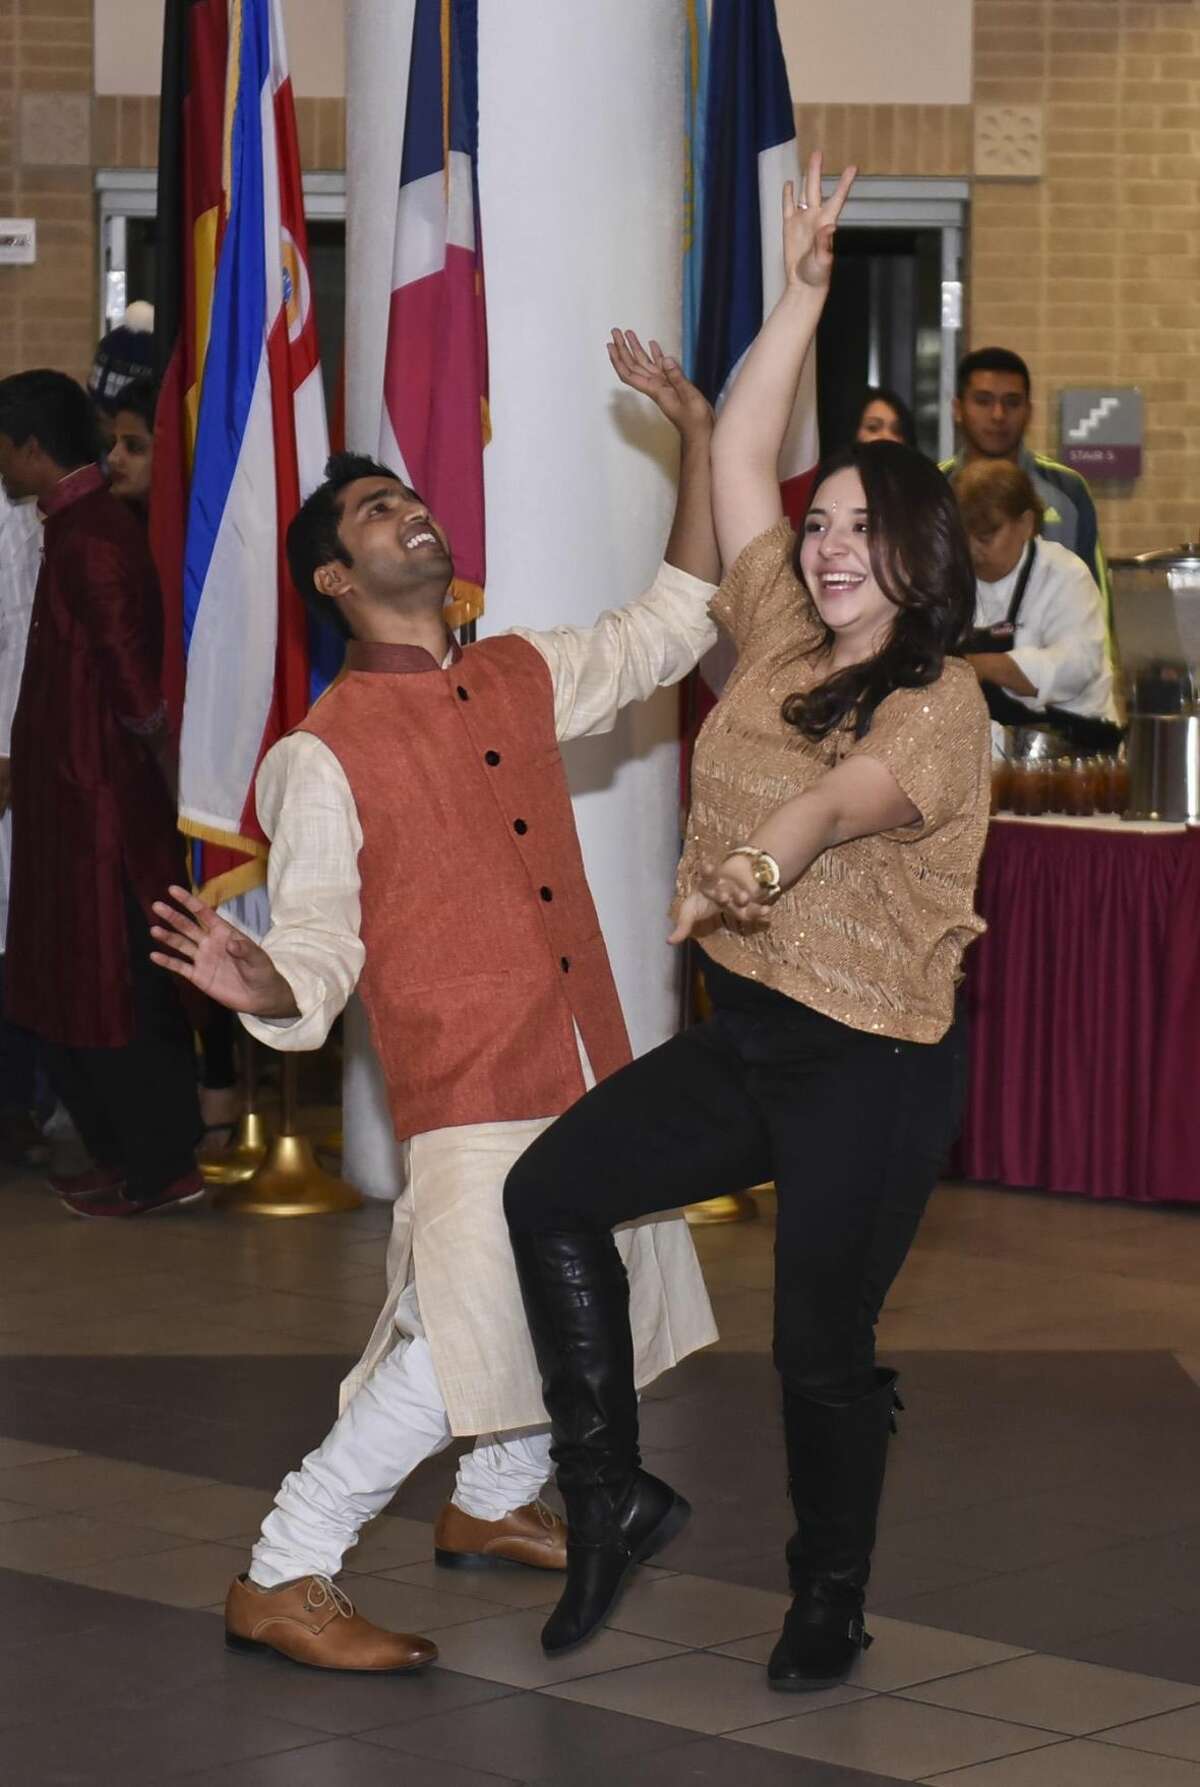 Surya Racherla and Leslie Martinez perform a dance on Tuesday evening at the TAMIU Student Center during the Diwali Festival of Lights Celebration. (Photo by Danny Zaragoza/Laredo Morning Times)